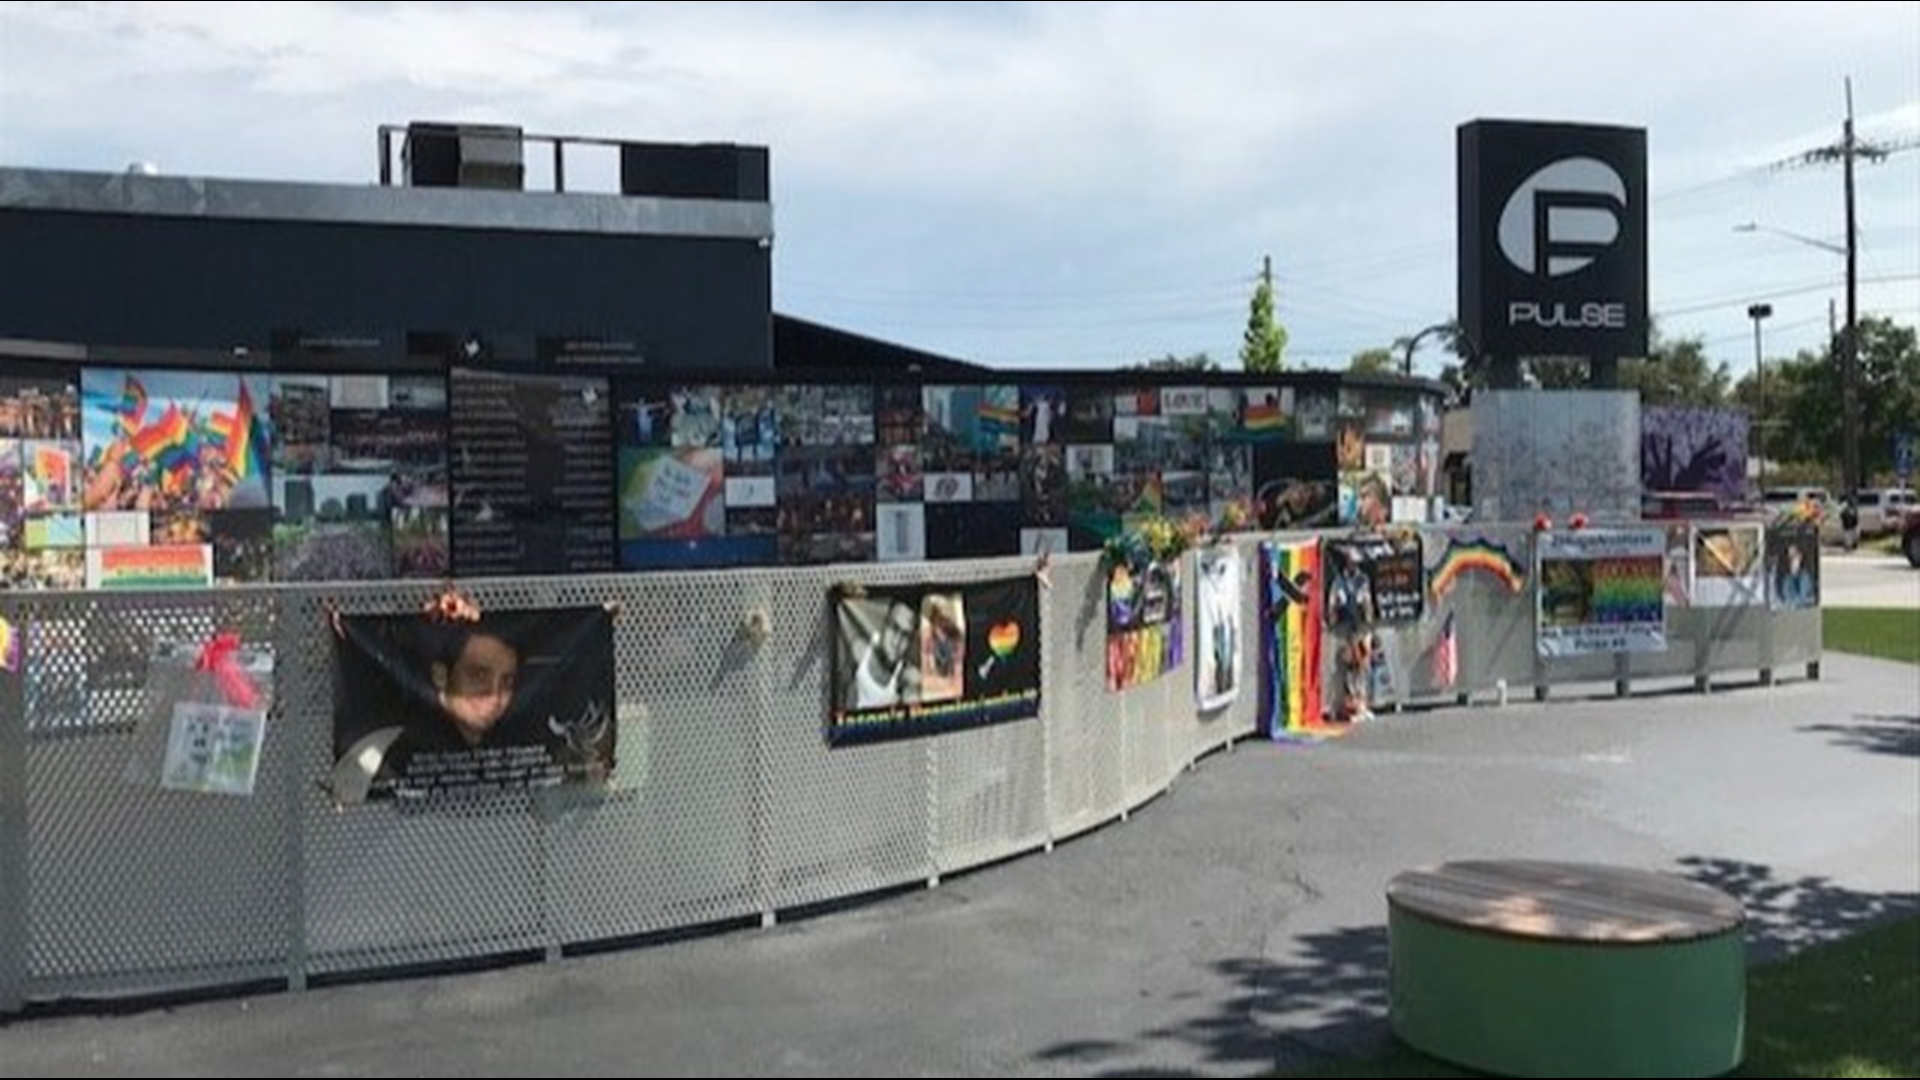 Tuesday marks two years since a gunman took 49 lives and injured another 68 at Pulse Nightclub. For 31 days during the summer of 2016 employees of the Orange County Regional History Center collected and cataloged nearly 6,000 items left at various memorials.